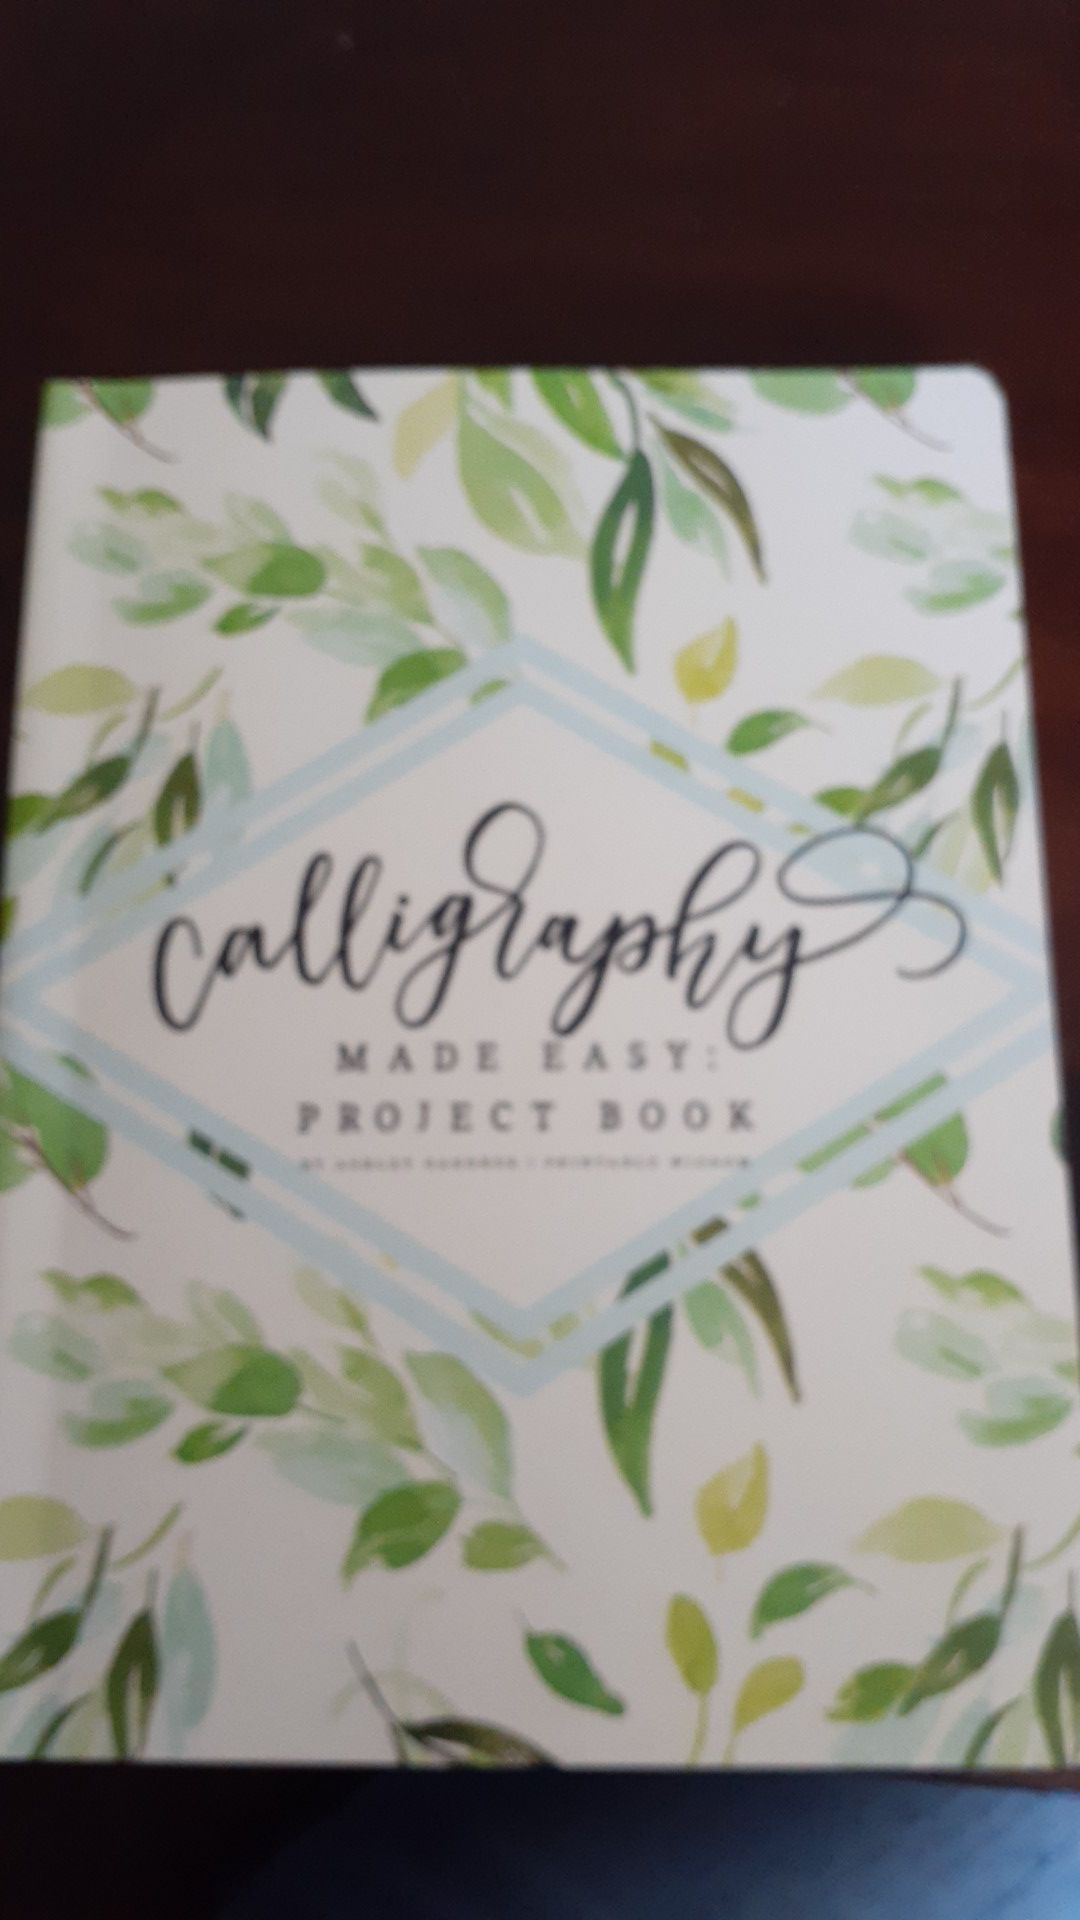 Calligraphy book